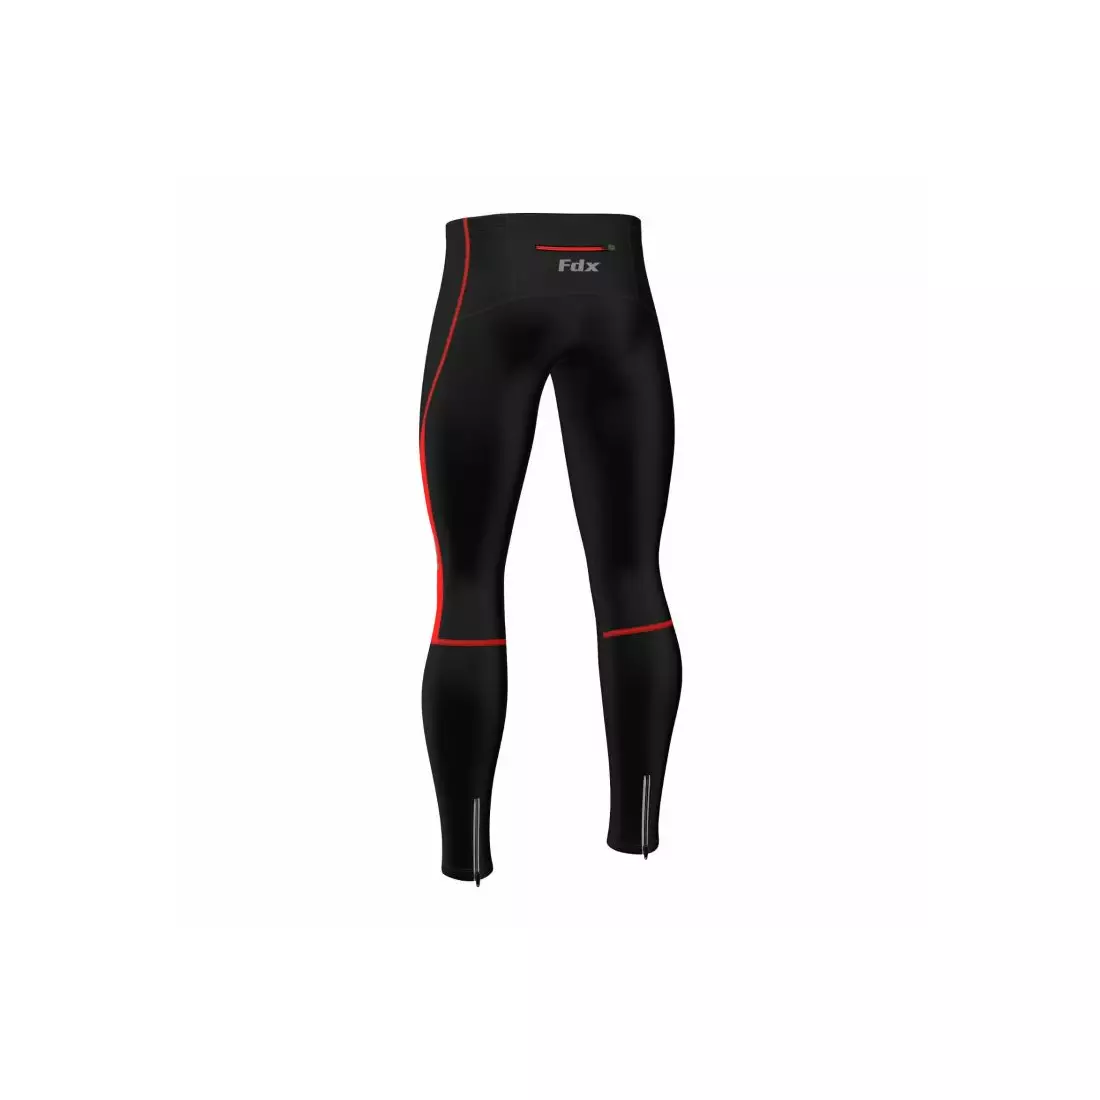 FDX 1810 men's insulated cycling trousers without braces, black and red